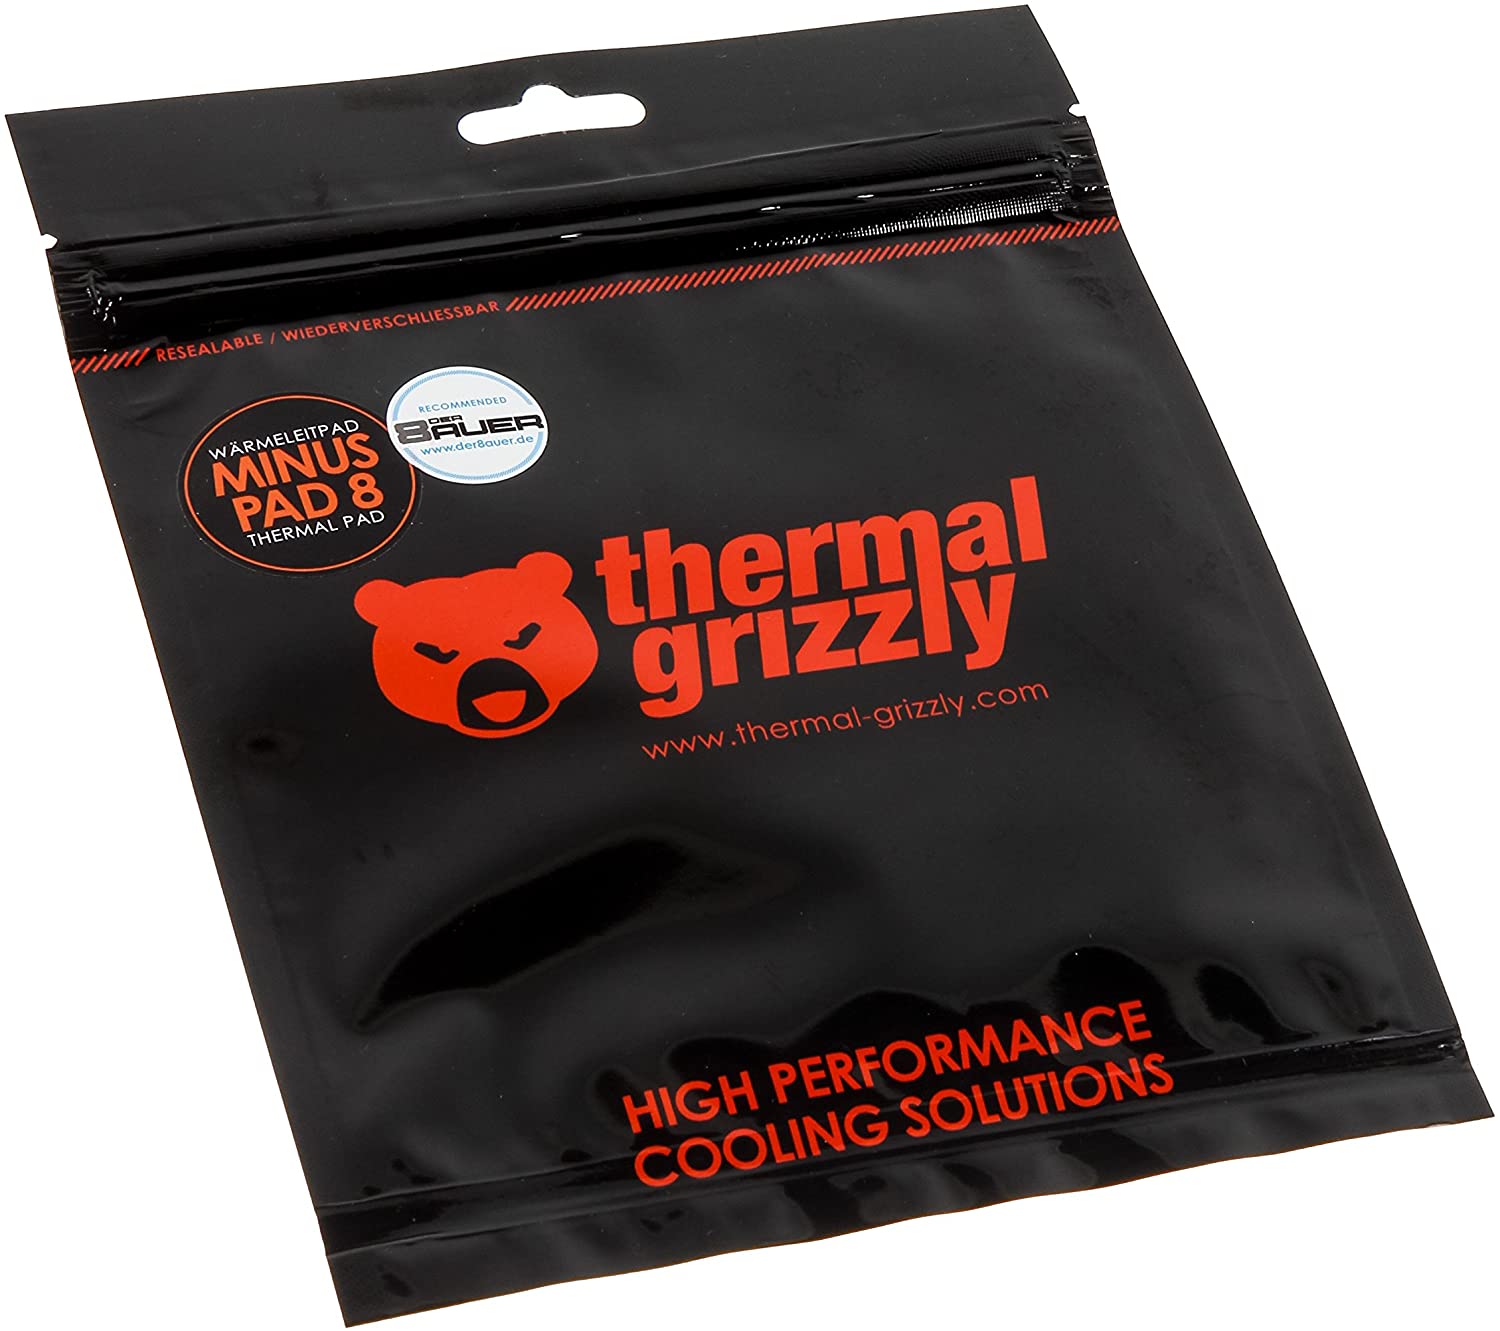 Thermal Grizzly-Minus Pad 8 - 100x 100x 1,5 mm - Store 974 | ستور ٩٧٤